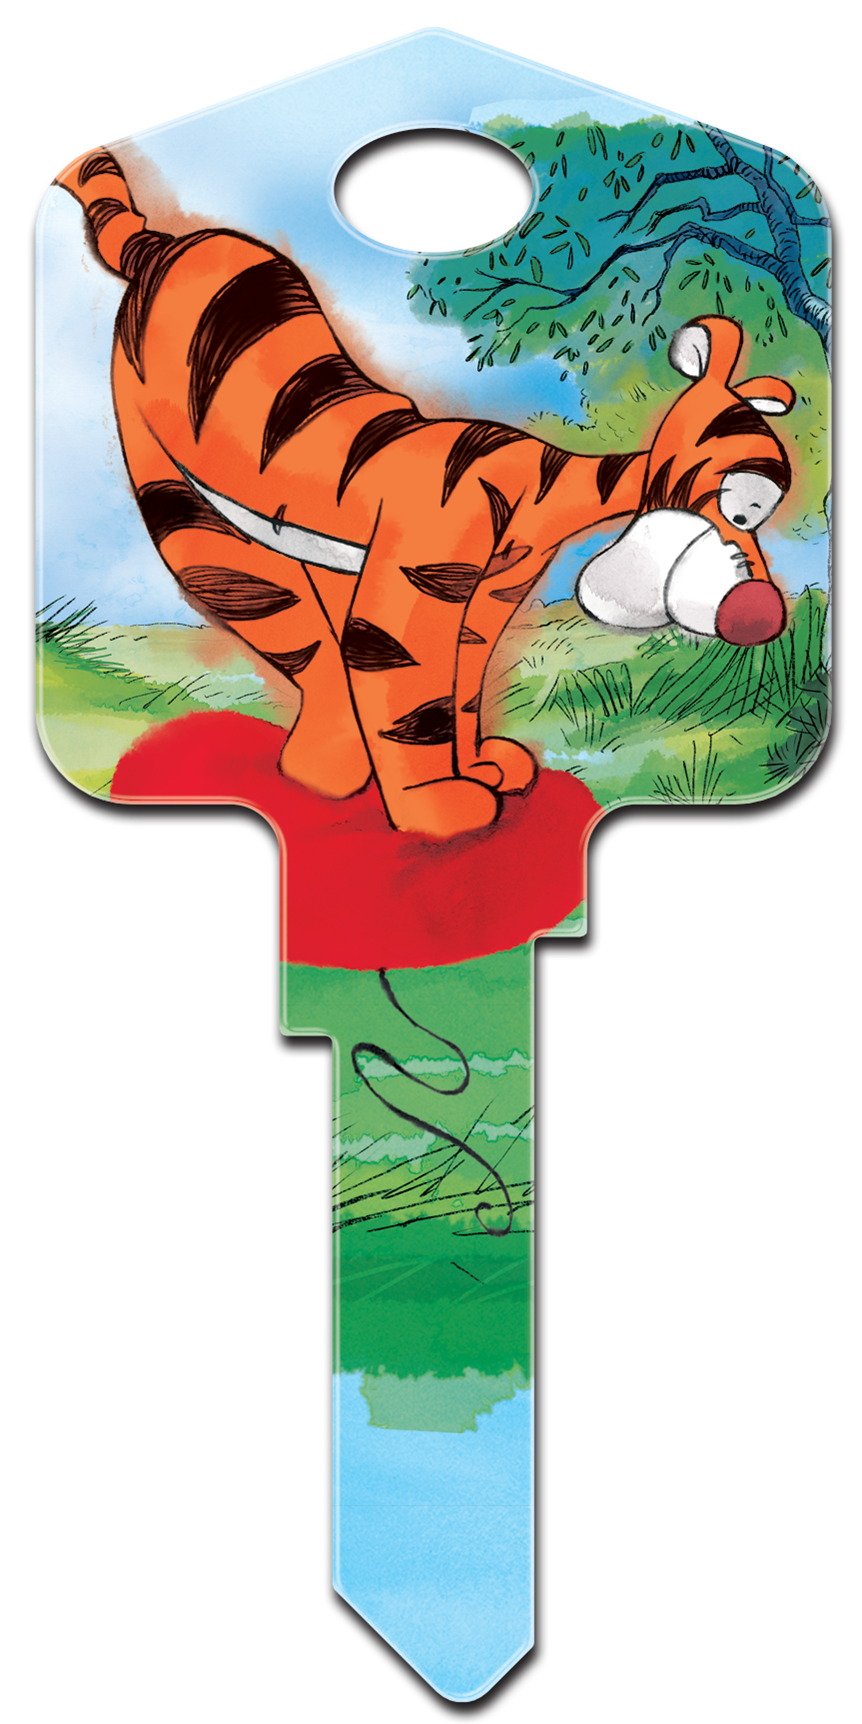 Details about   DISNEY TIGGER BLANK HOUSE KEY FOR 5 PIN KWIKSET KW1 CAN BE PUNCHED TO YOUR CODE 